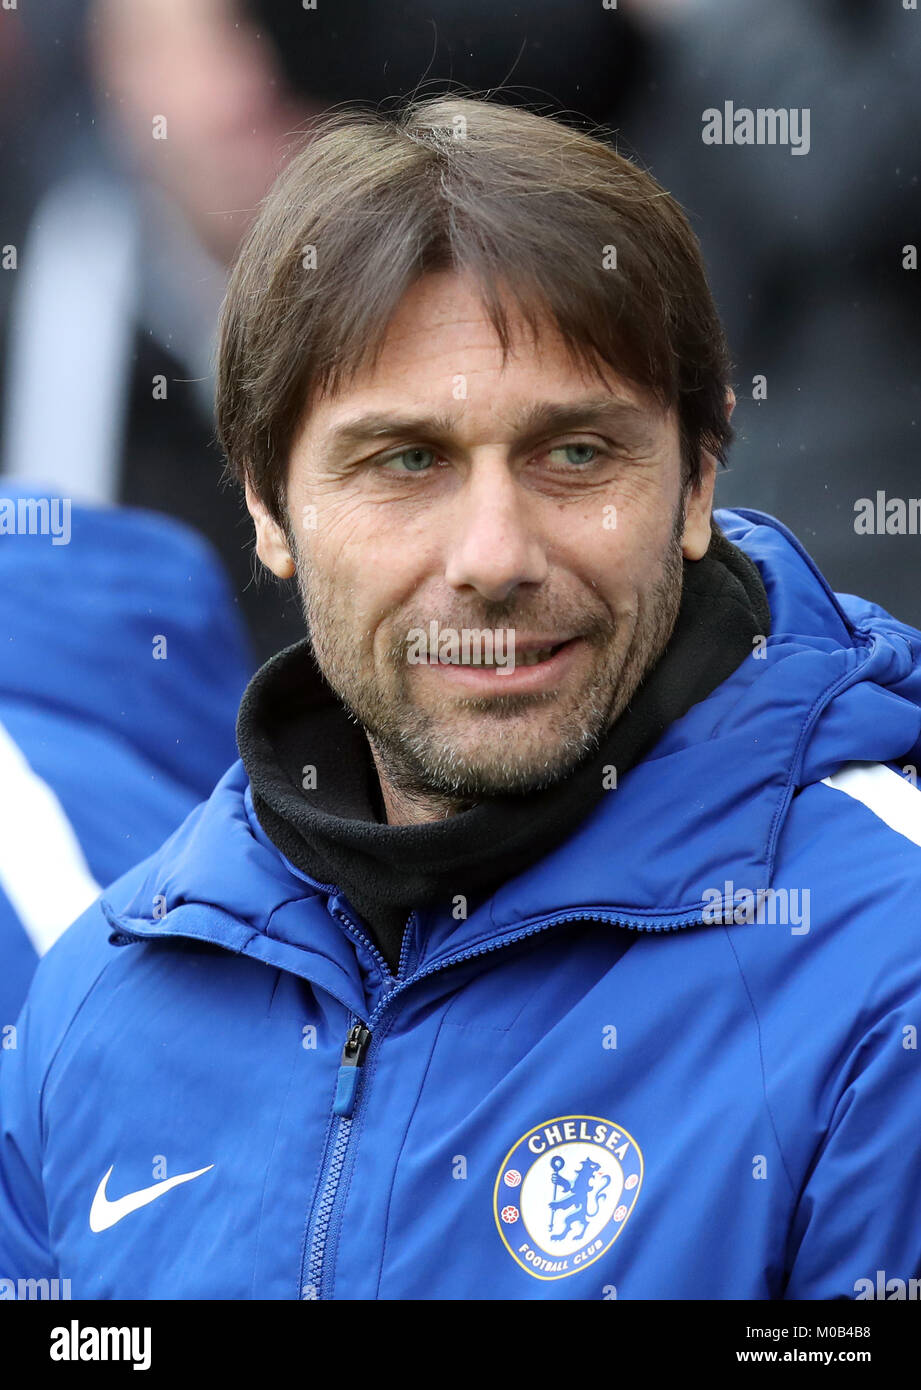 Chelsea manager Antonio Conte during the Premier League match at the AMEX Stadium, Brighton. PRESS ASSOCIATION Photo. Picture date: Saturday January 20, 2018. See PA story SOCCER Brighton. Photo credit should read: Gareth Fuller/PA Wire. RESTRICTIONS: No use with unauthorised audio, video, data, fixture lists, club/league logos or 'live' services. Online in-match use limited to 75 images, no video emulation. No use in betting, games or single club/league/player publications. Stock Photo